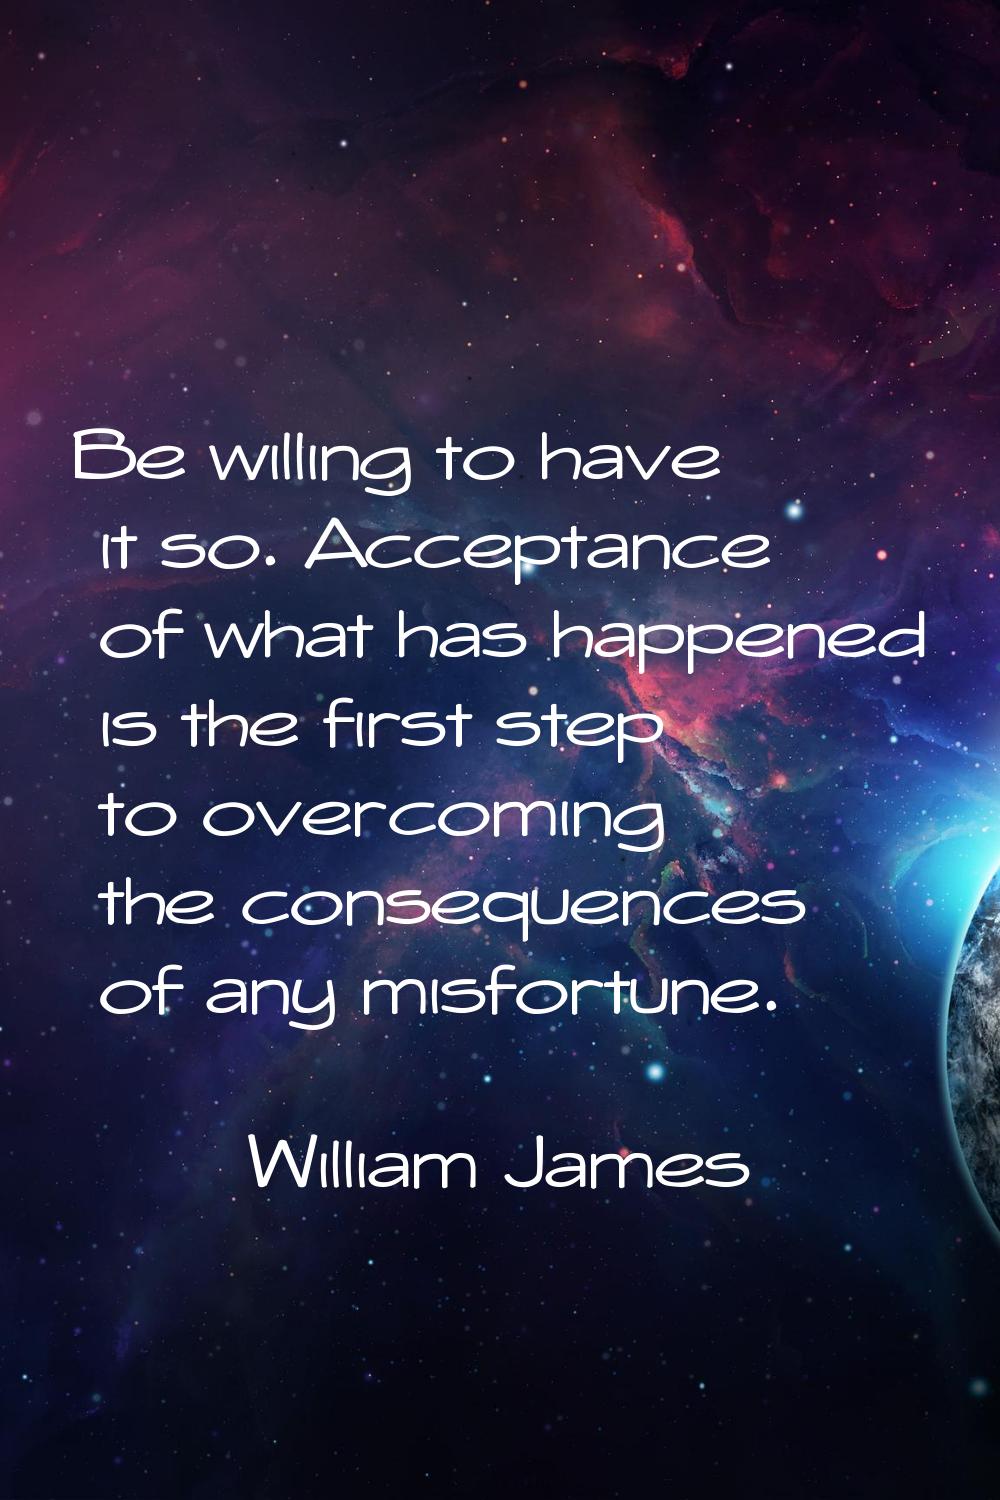 Be willing to have it so. Acceptance of what has happened is the first step to overcoming the conse